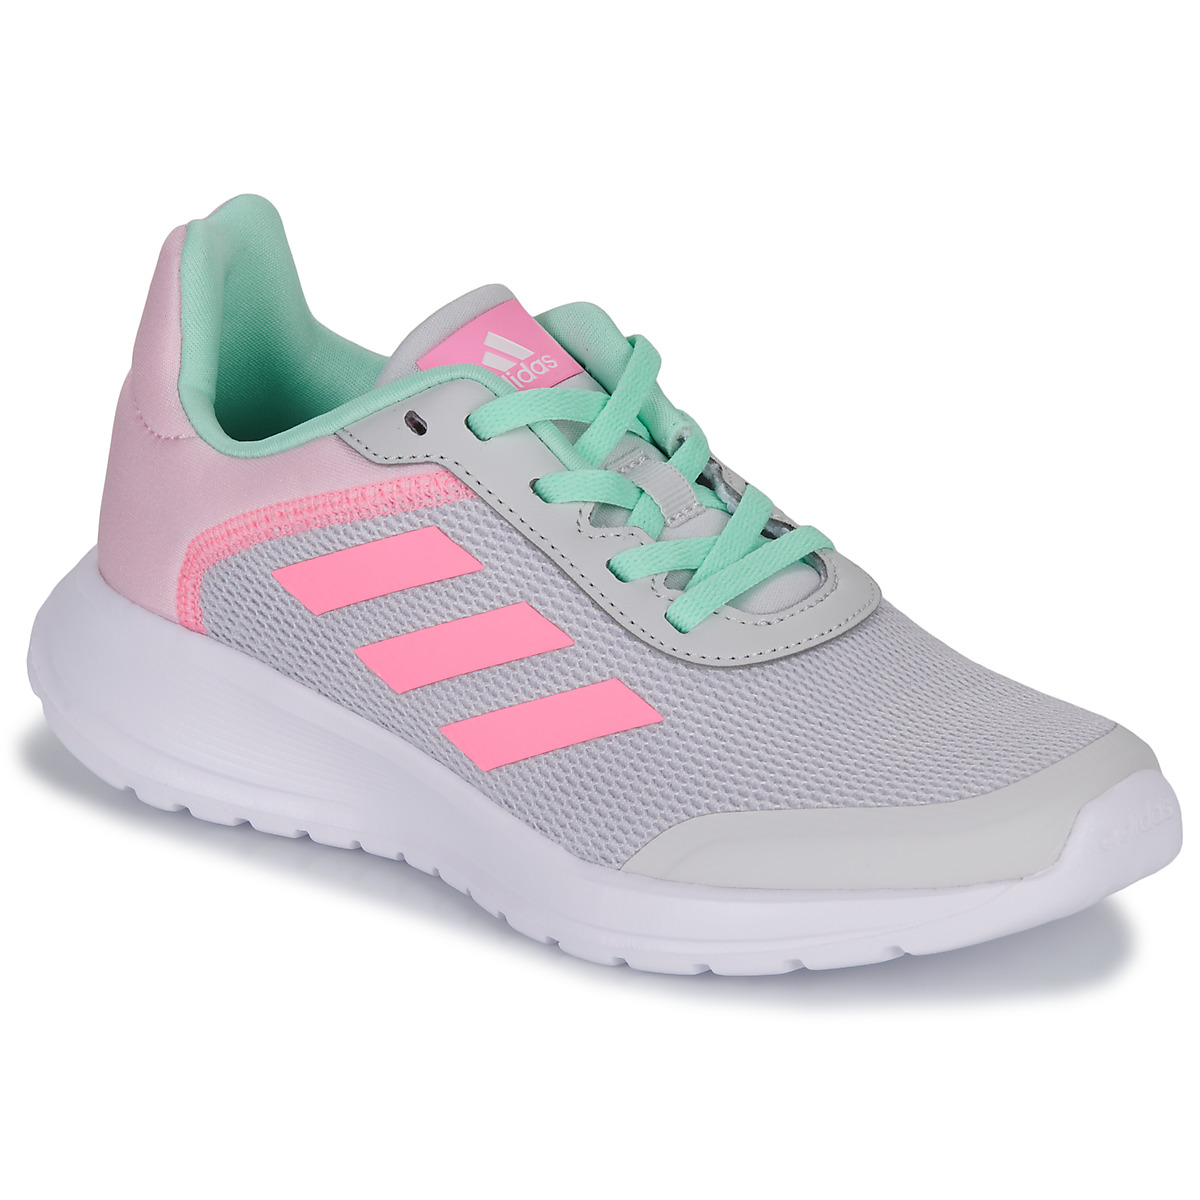 Adidas Sportswear Tensaur Run 2.0 delivery ! € Pink Shoes K / Running-shoes Fast Spartoo - | Child Europe Green - 35,20